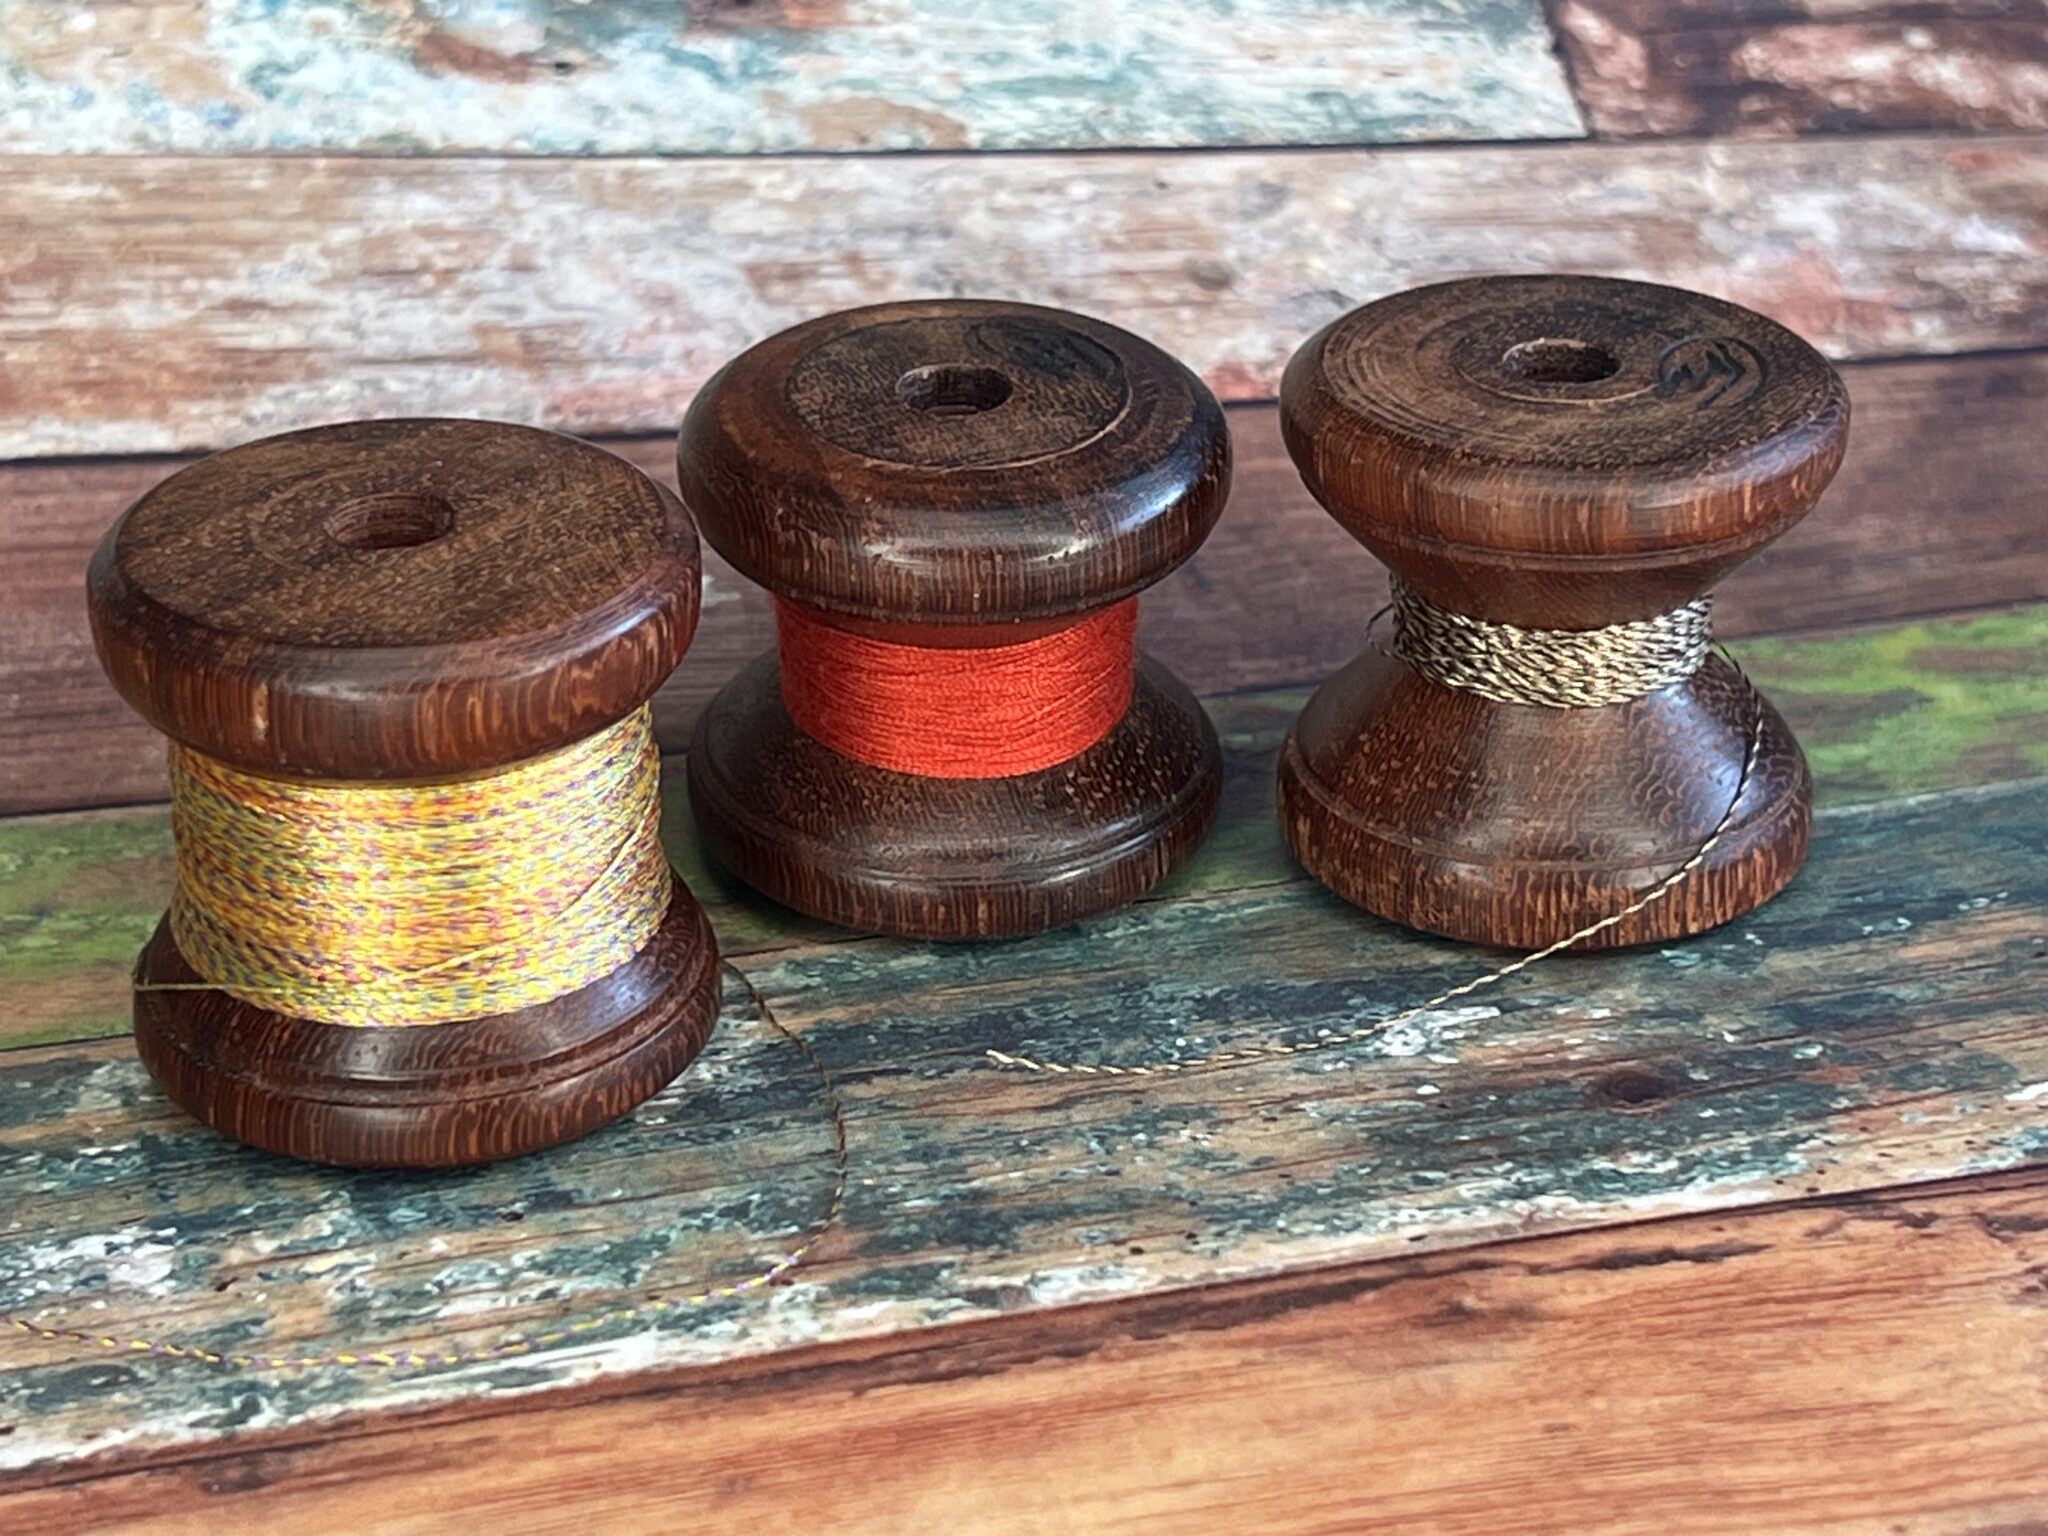 Where to buy fly tying spools